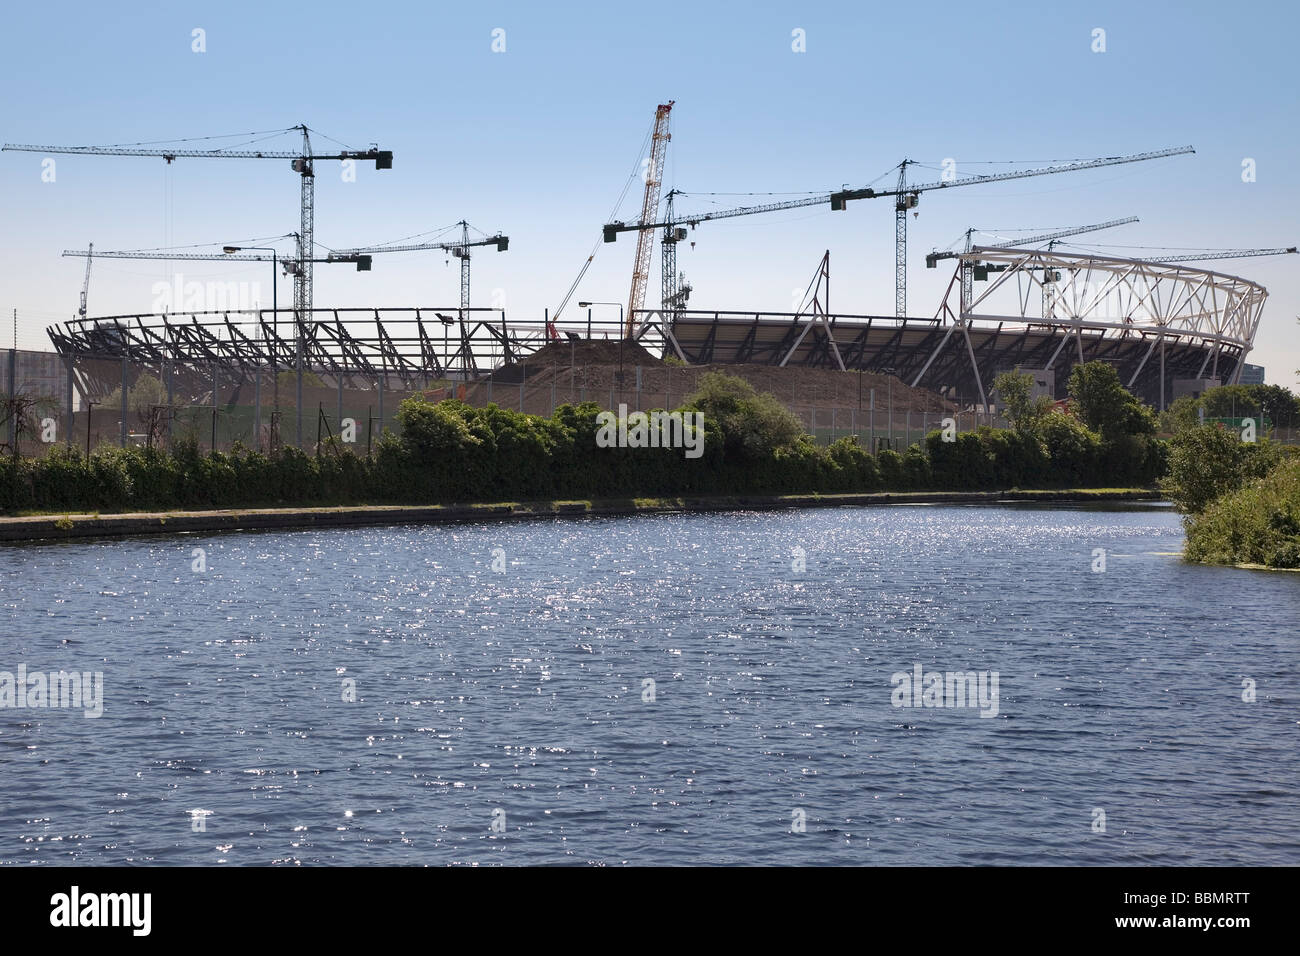 the 2012 olympic stadium under construction in Stratford, London, June 2009 Stock Photo